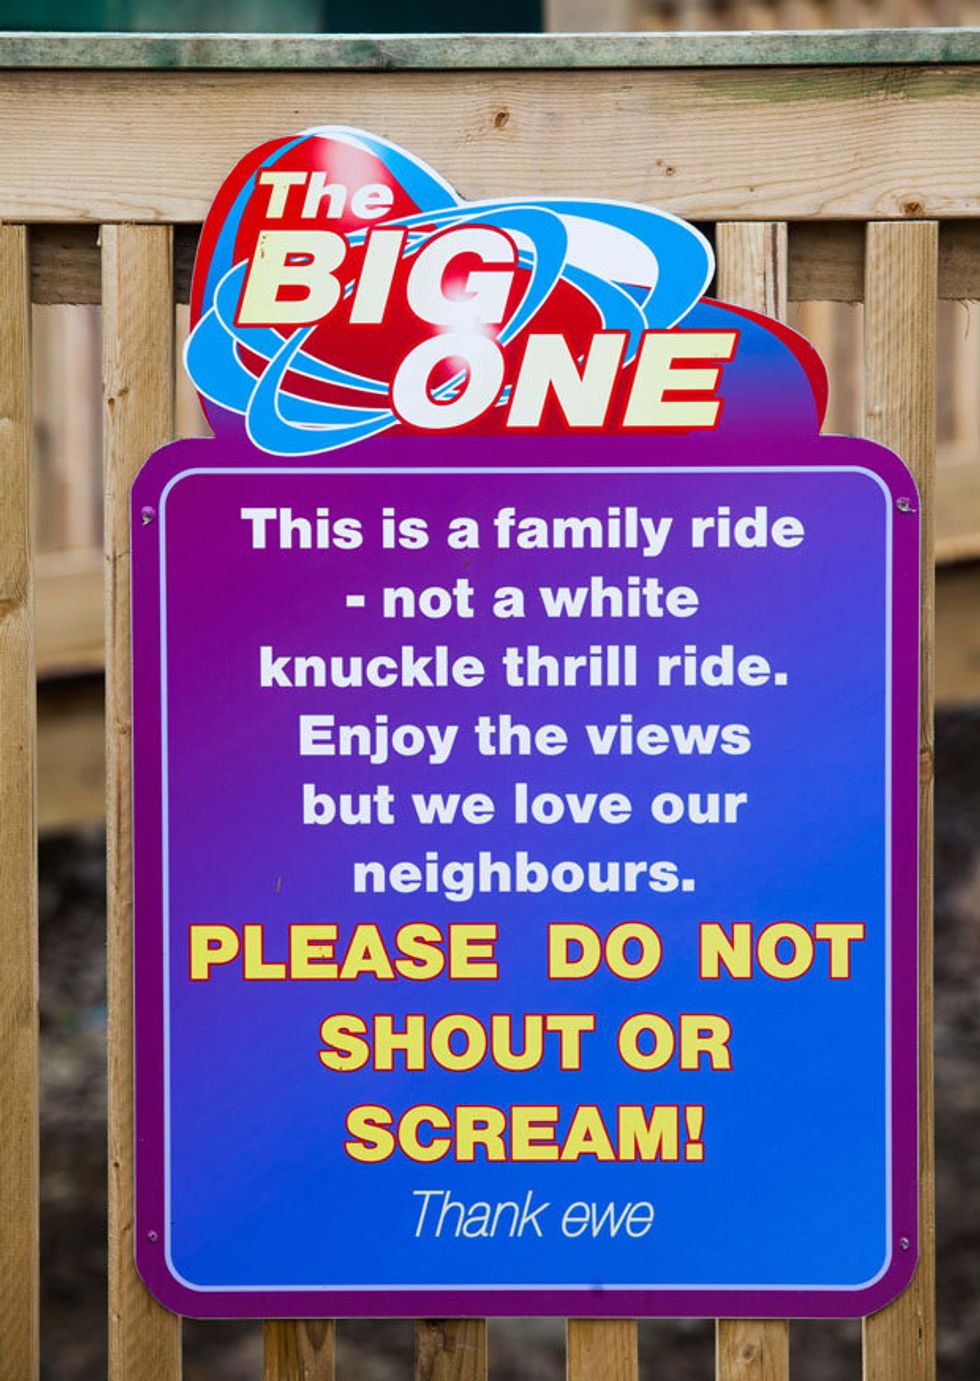 U.K. Amusement Park Tells Riders Not to 'Shout or Scream' on Newly-Opened Roller Coaster